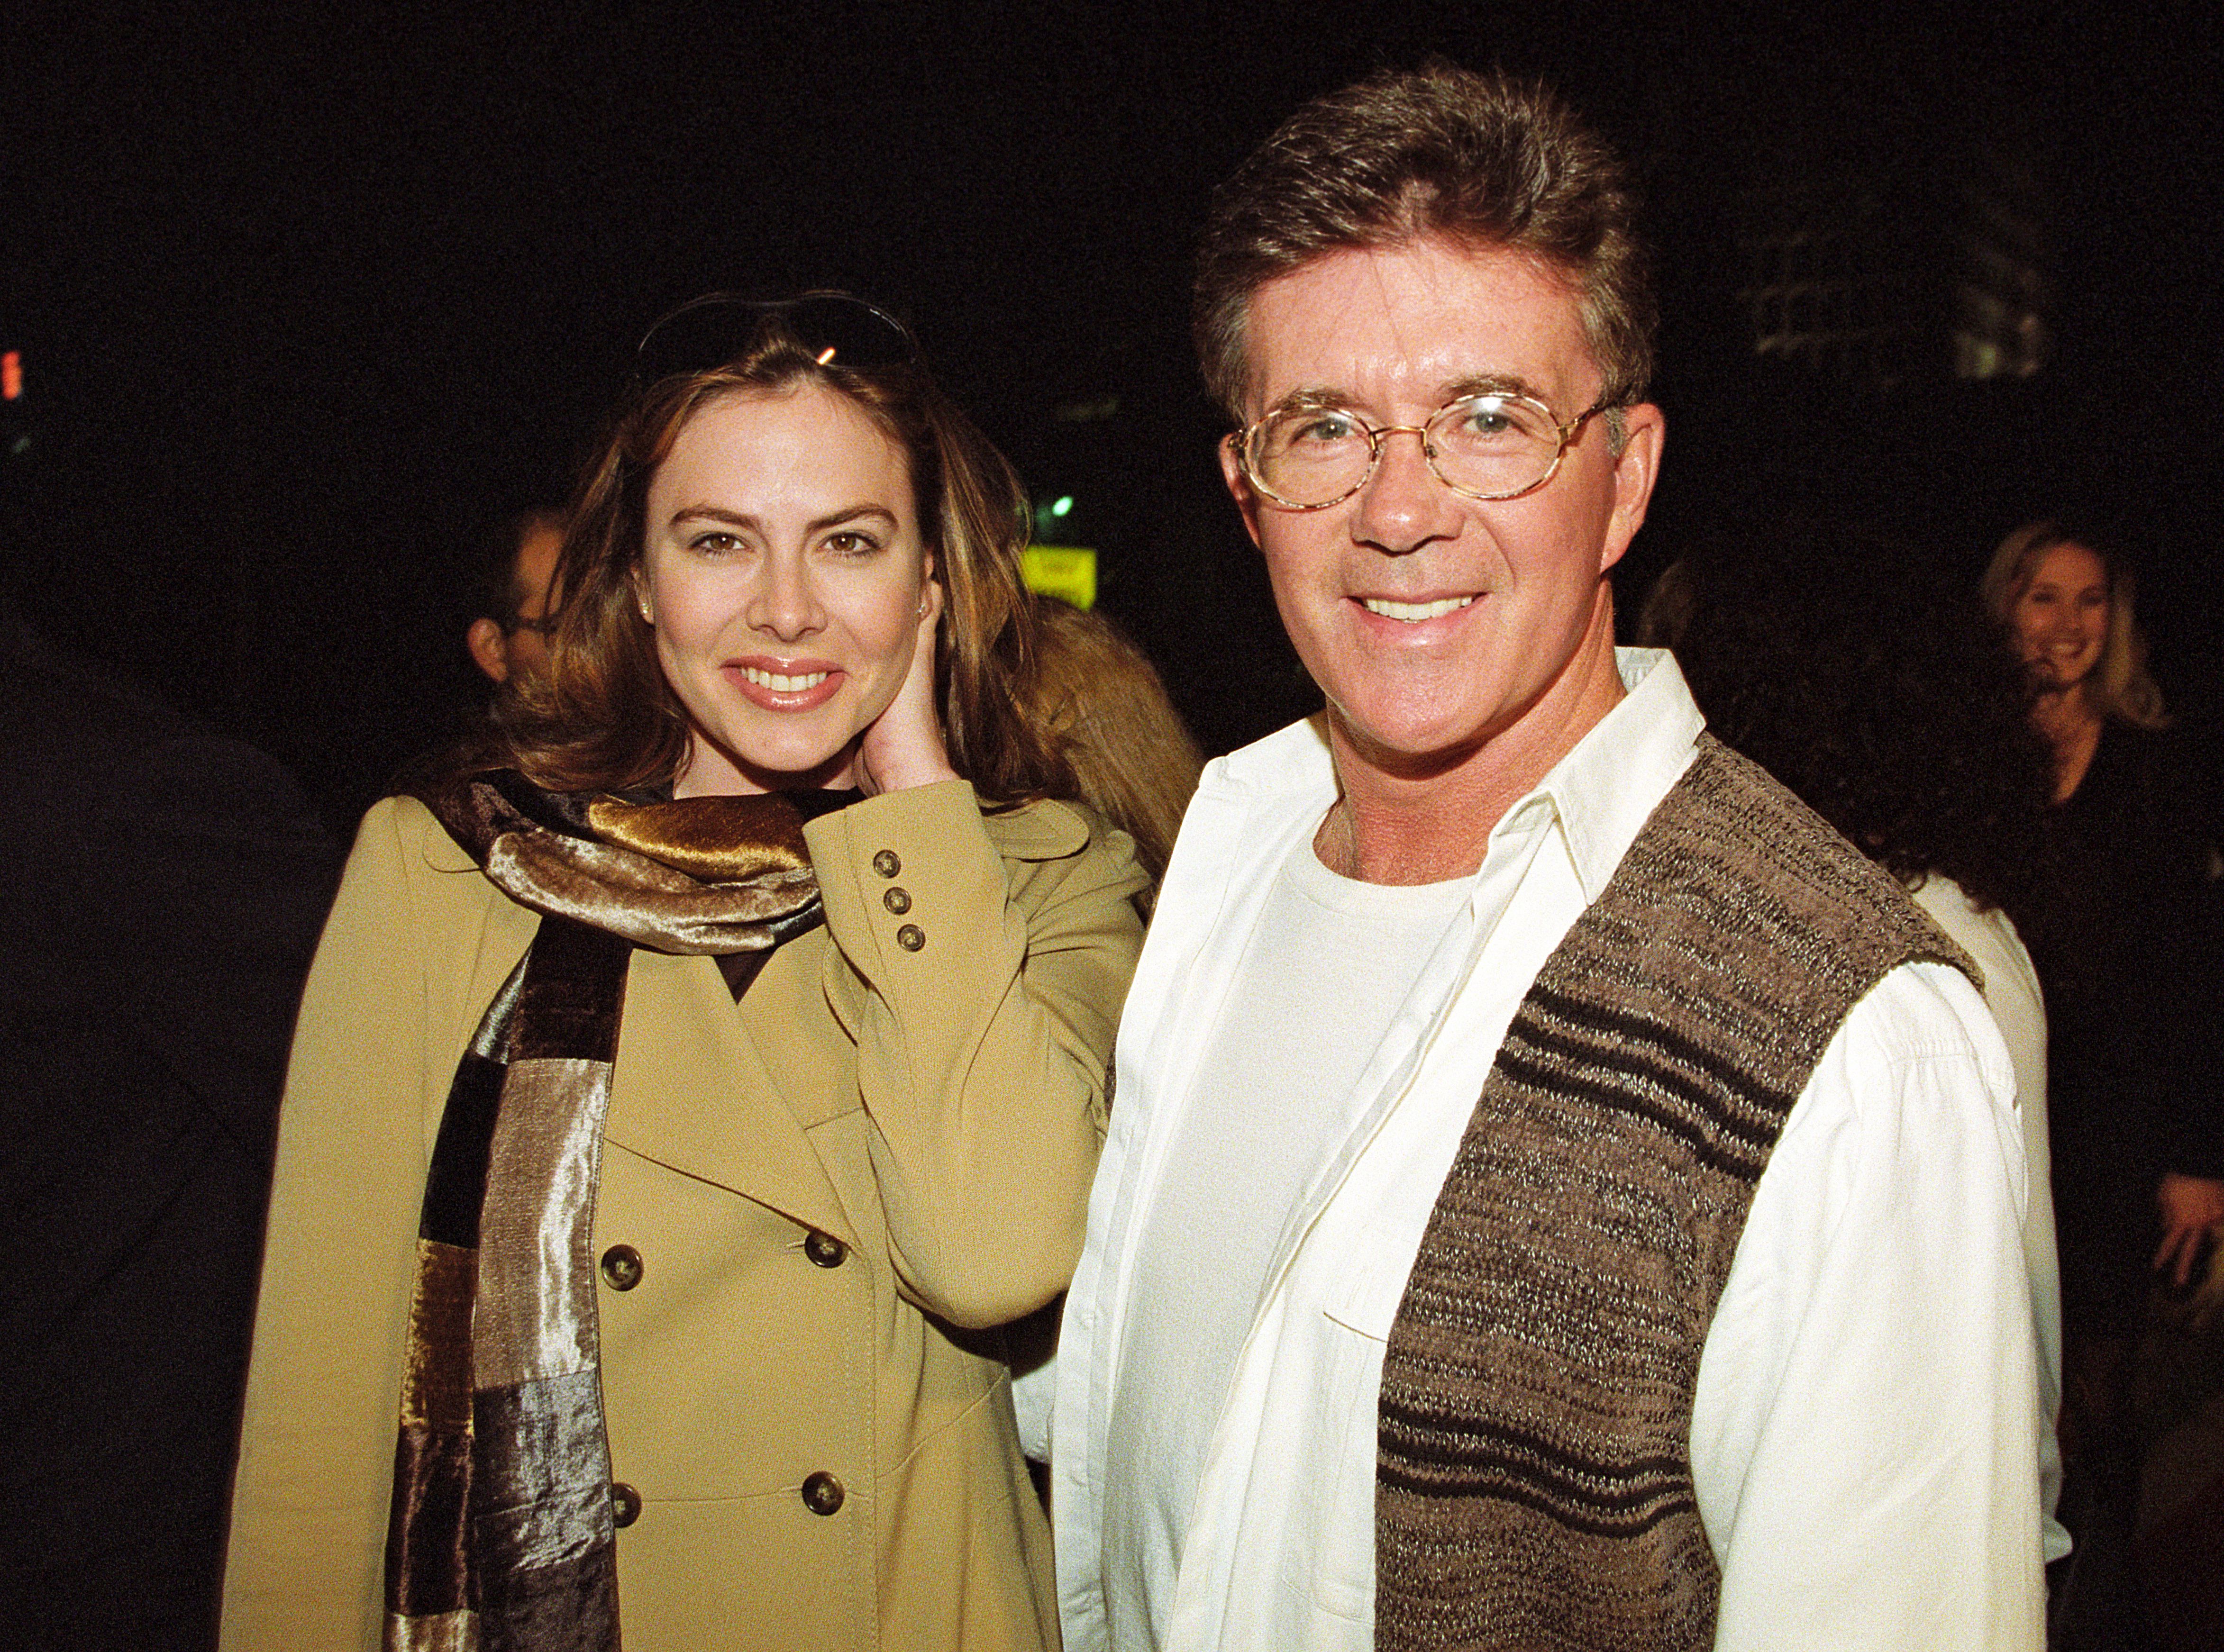 Growing Pains' star Ashley Johnson on working with Alan Thicke: 'I feel so  lucky